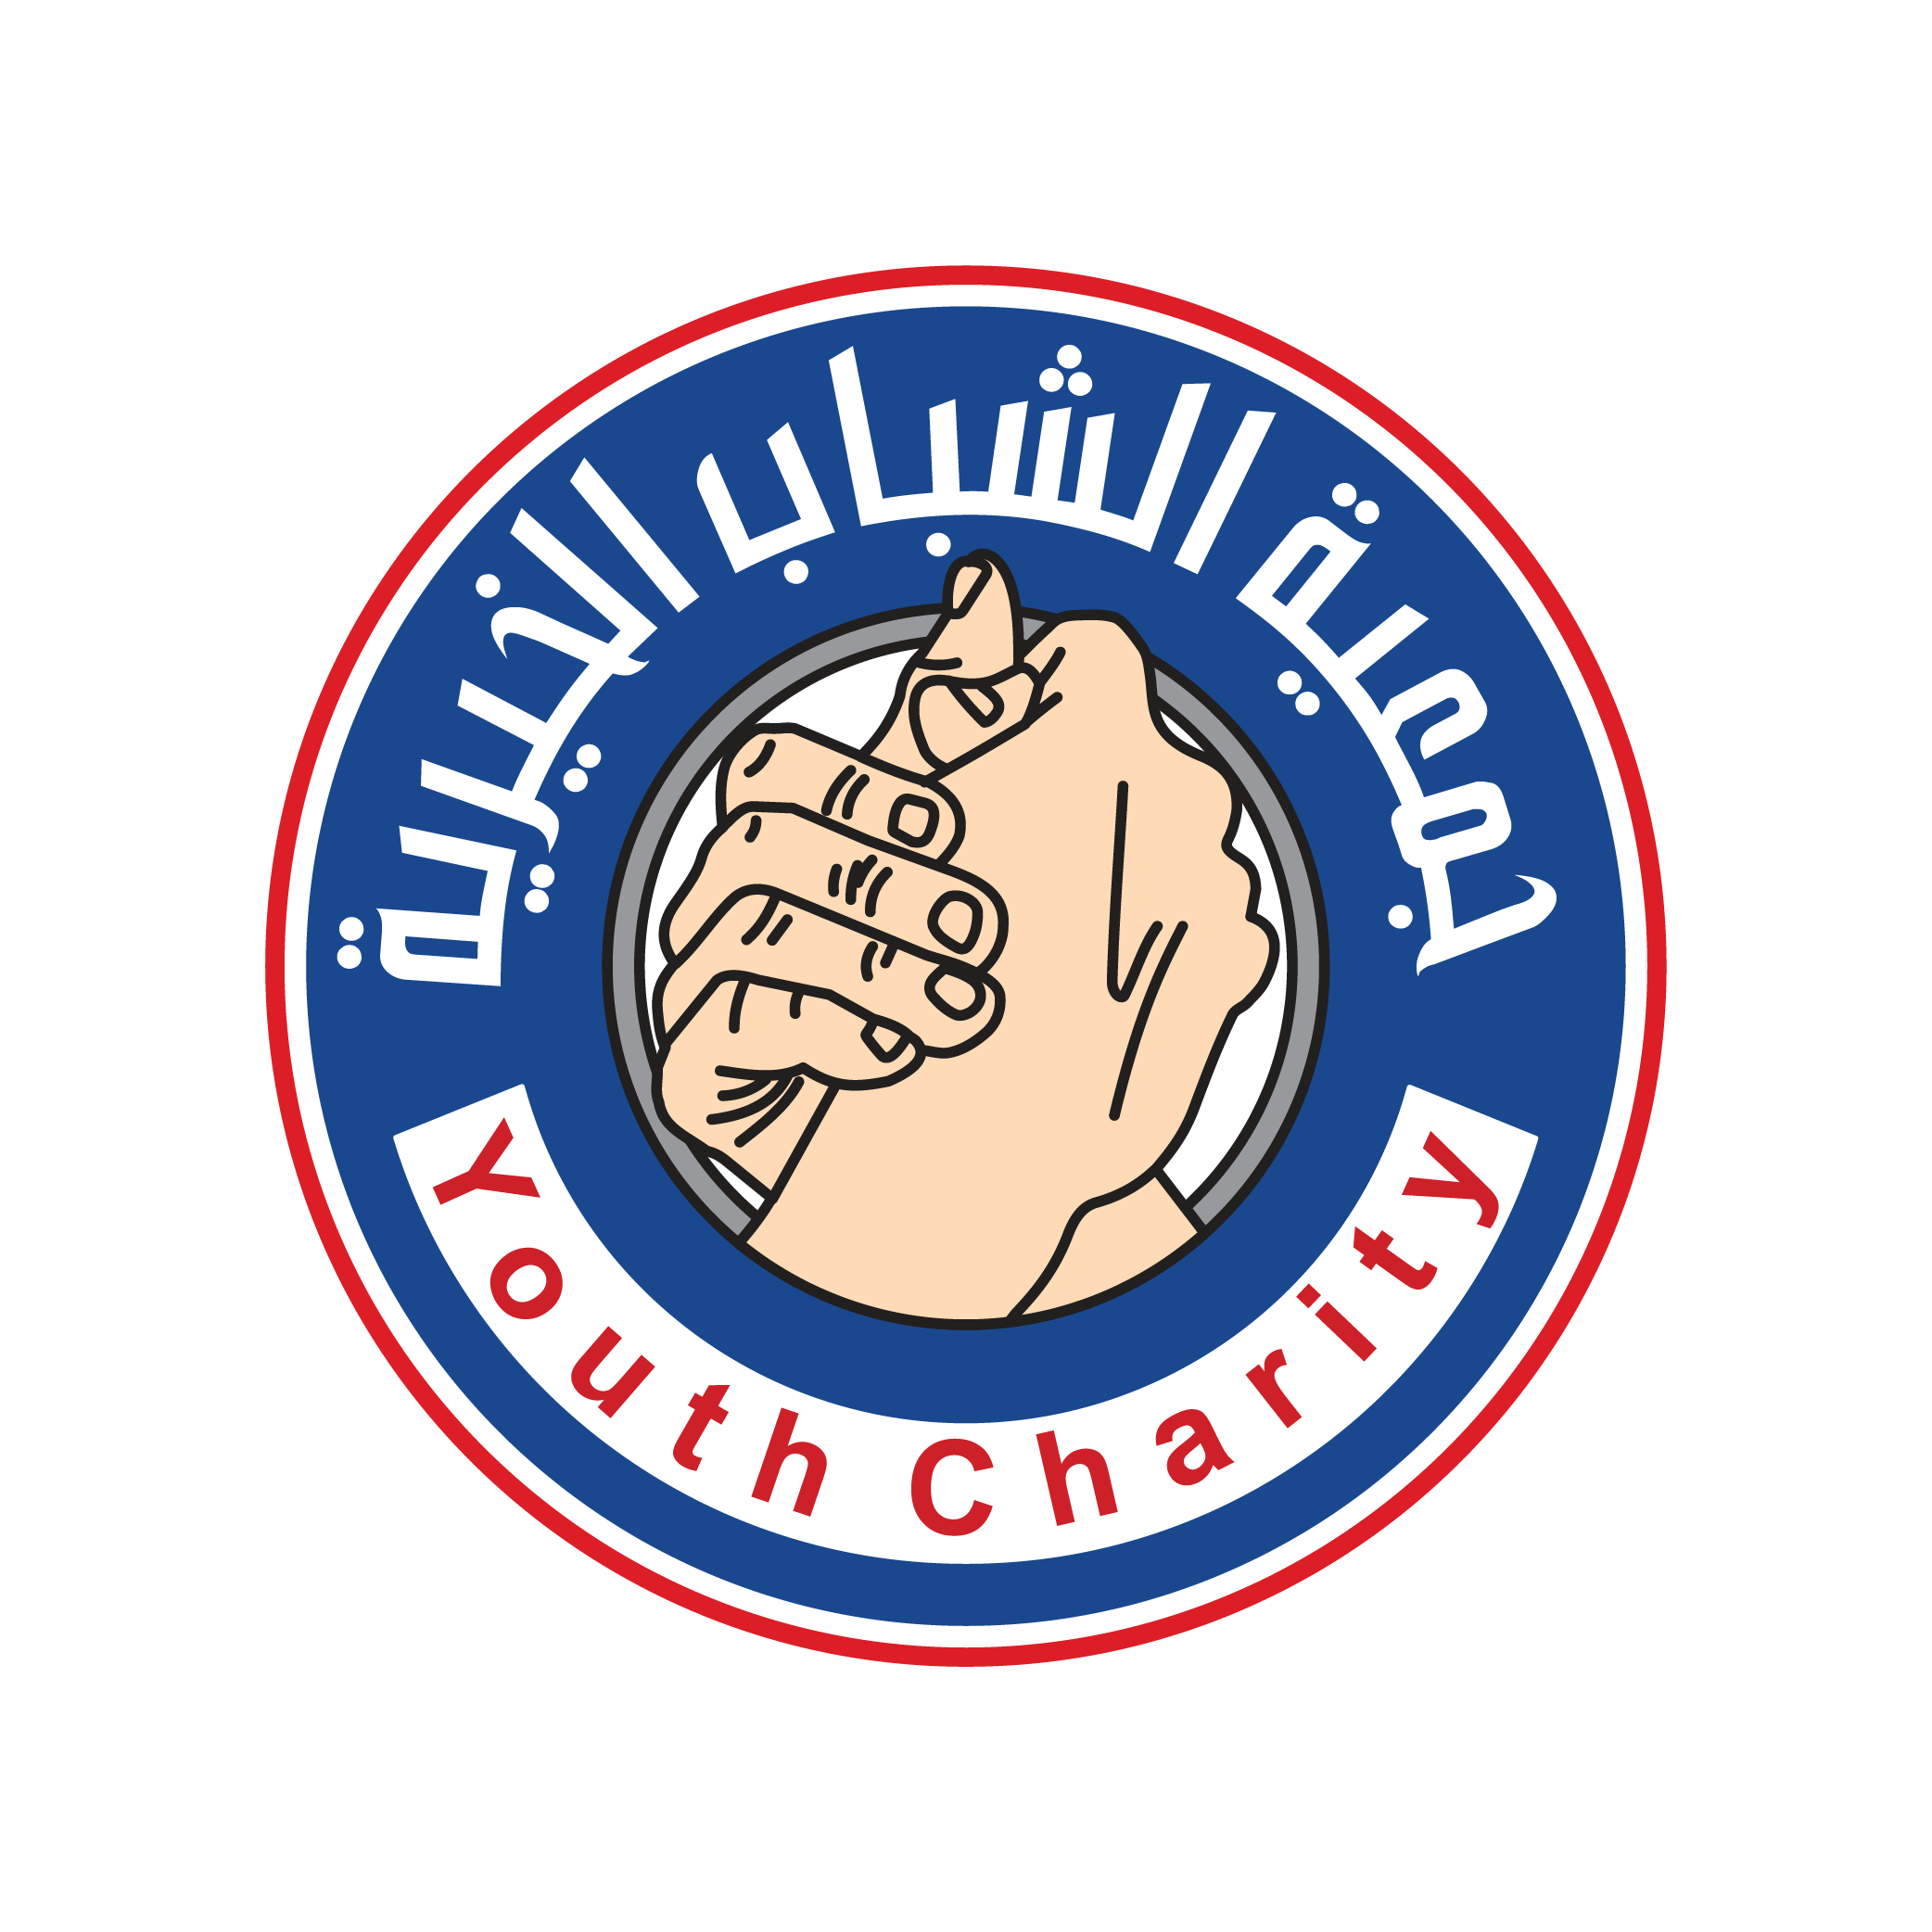 Youth Charity Association